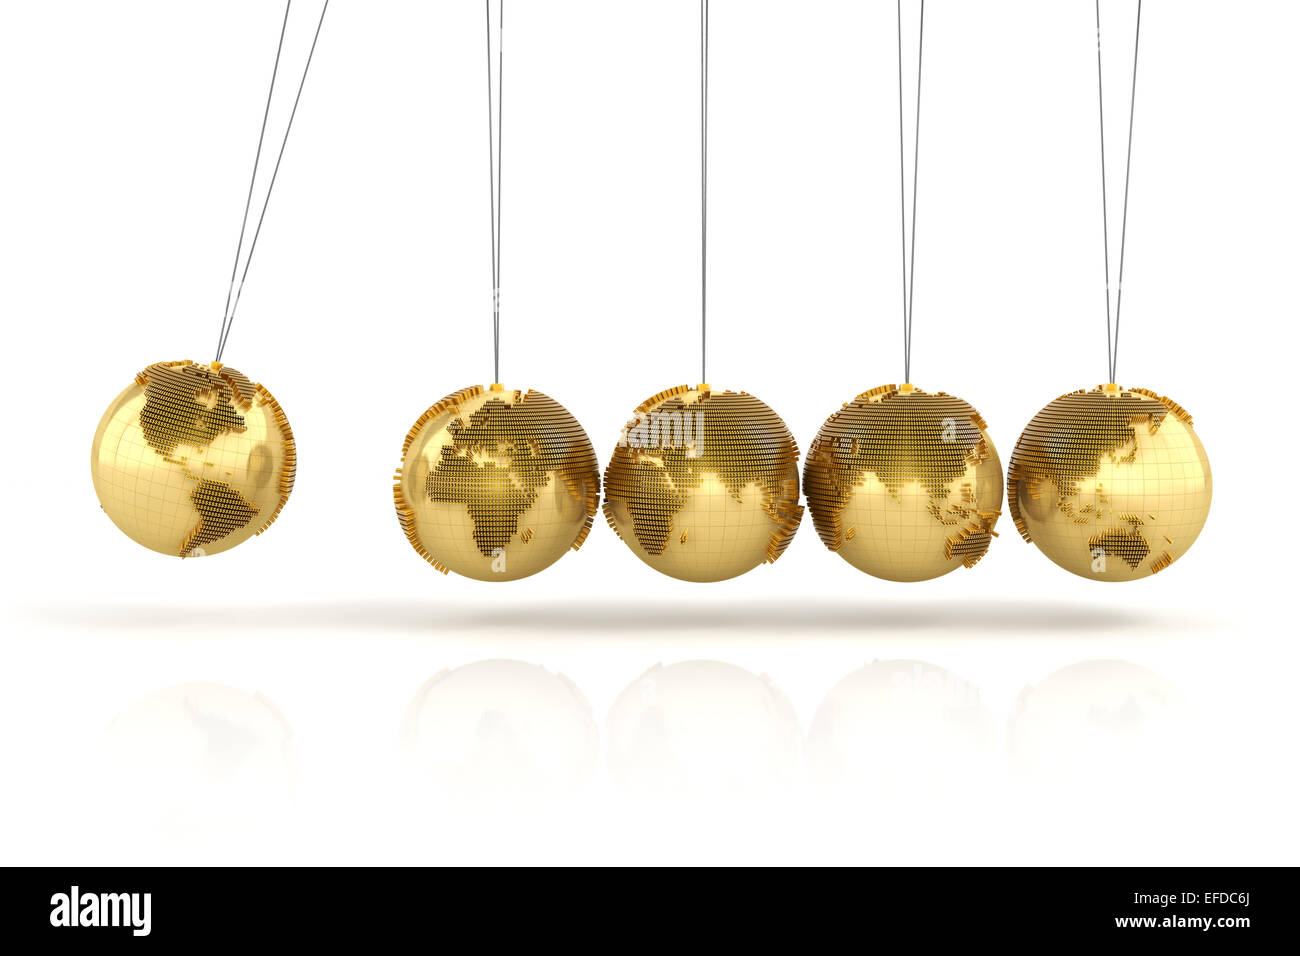 Newton's cradle with golden globes formed by dollar signs Stock Photo